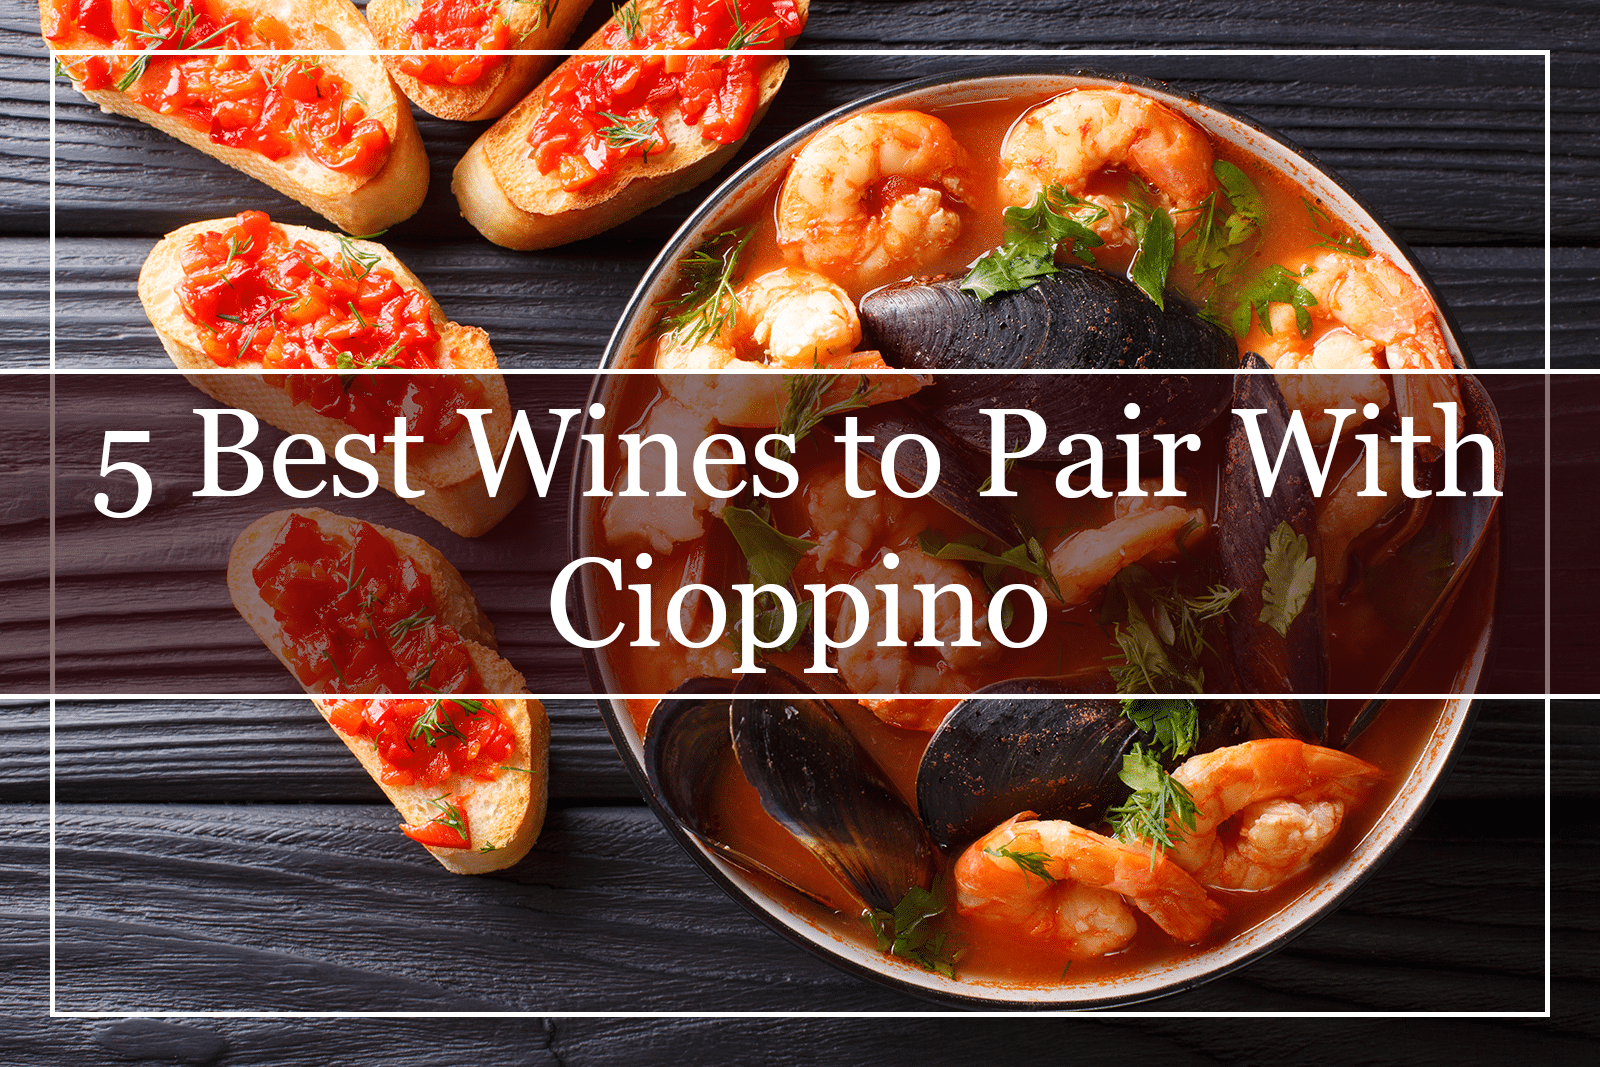 5 Best Wines to Pair With Cioppino (2021)